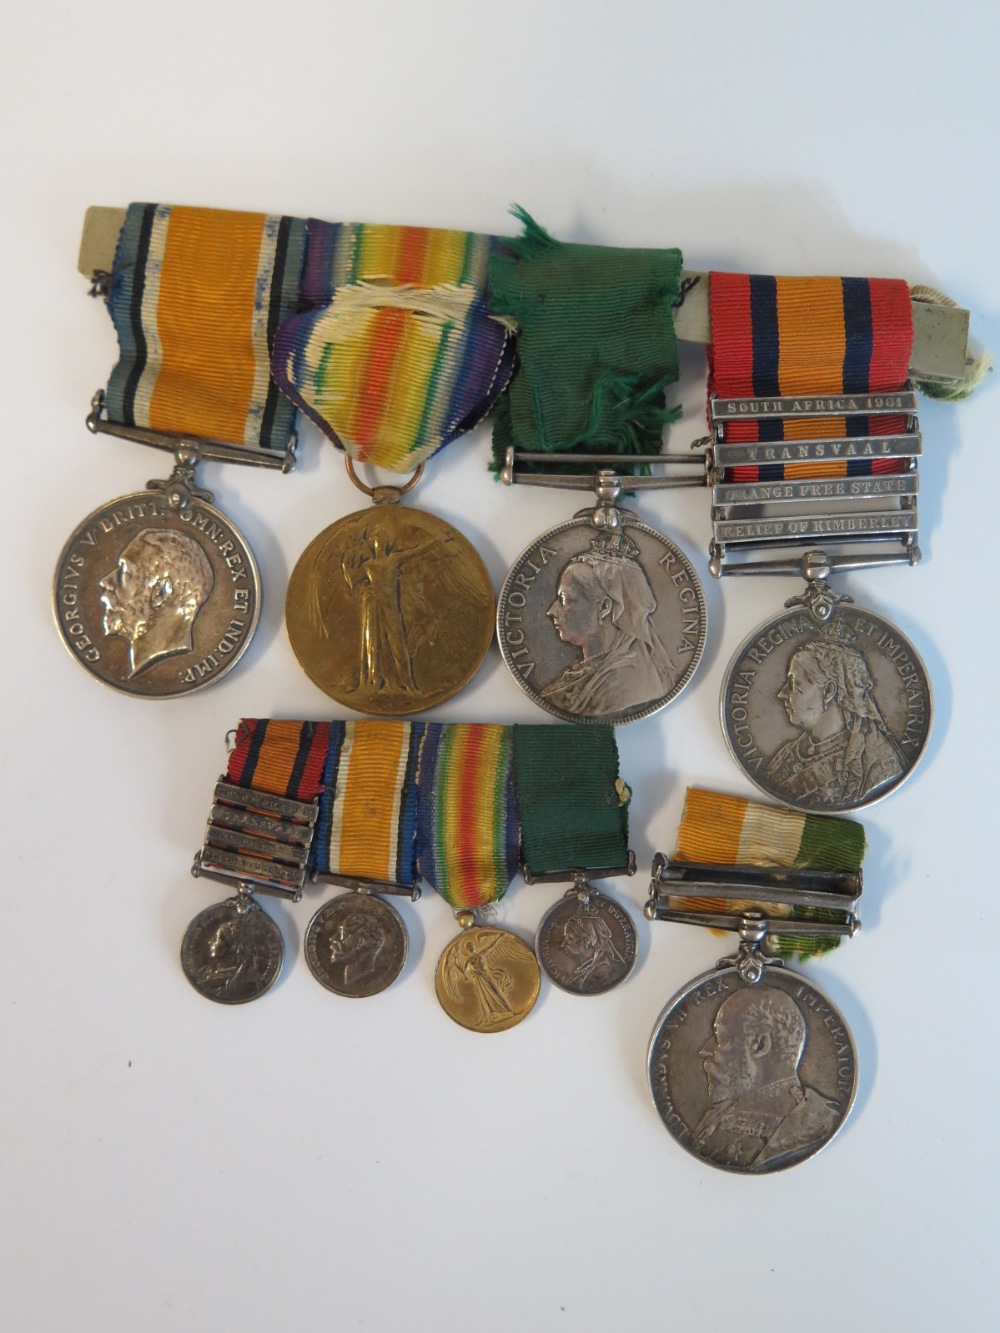 Victorian South Africa Medal with Relief of Kimberley, Orange Free State, Transvaal and South Africa